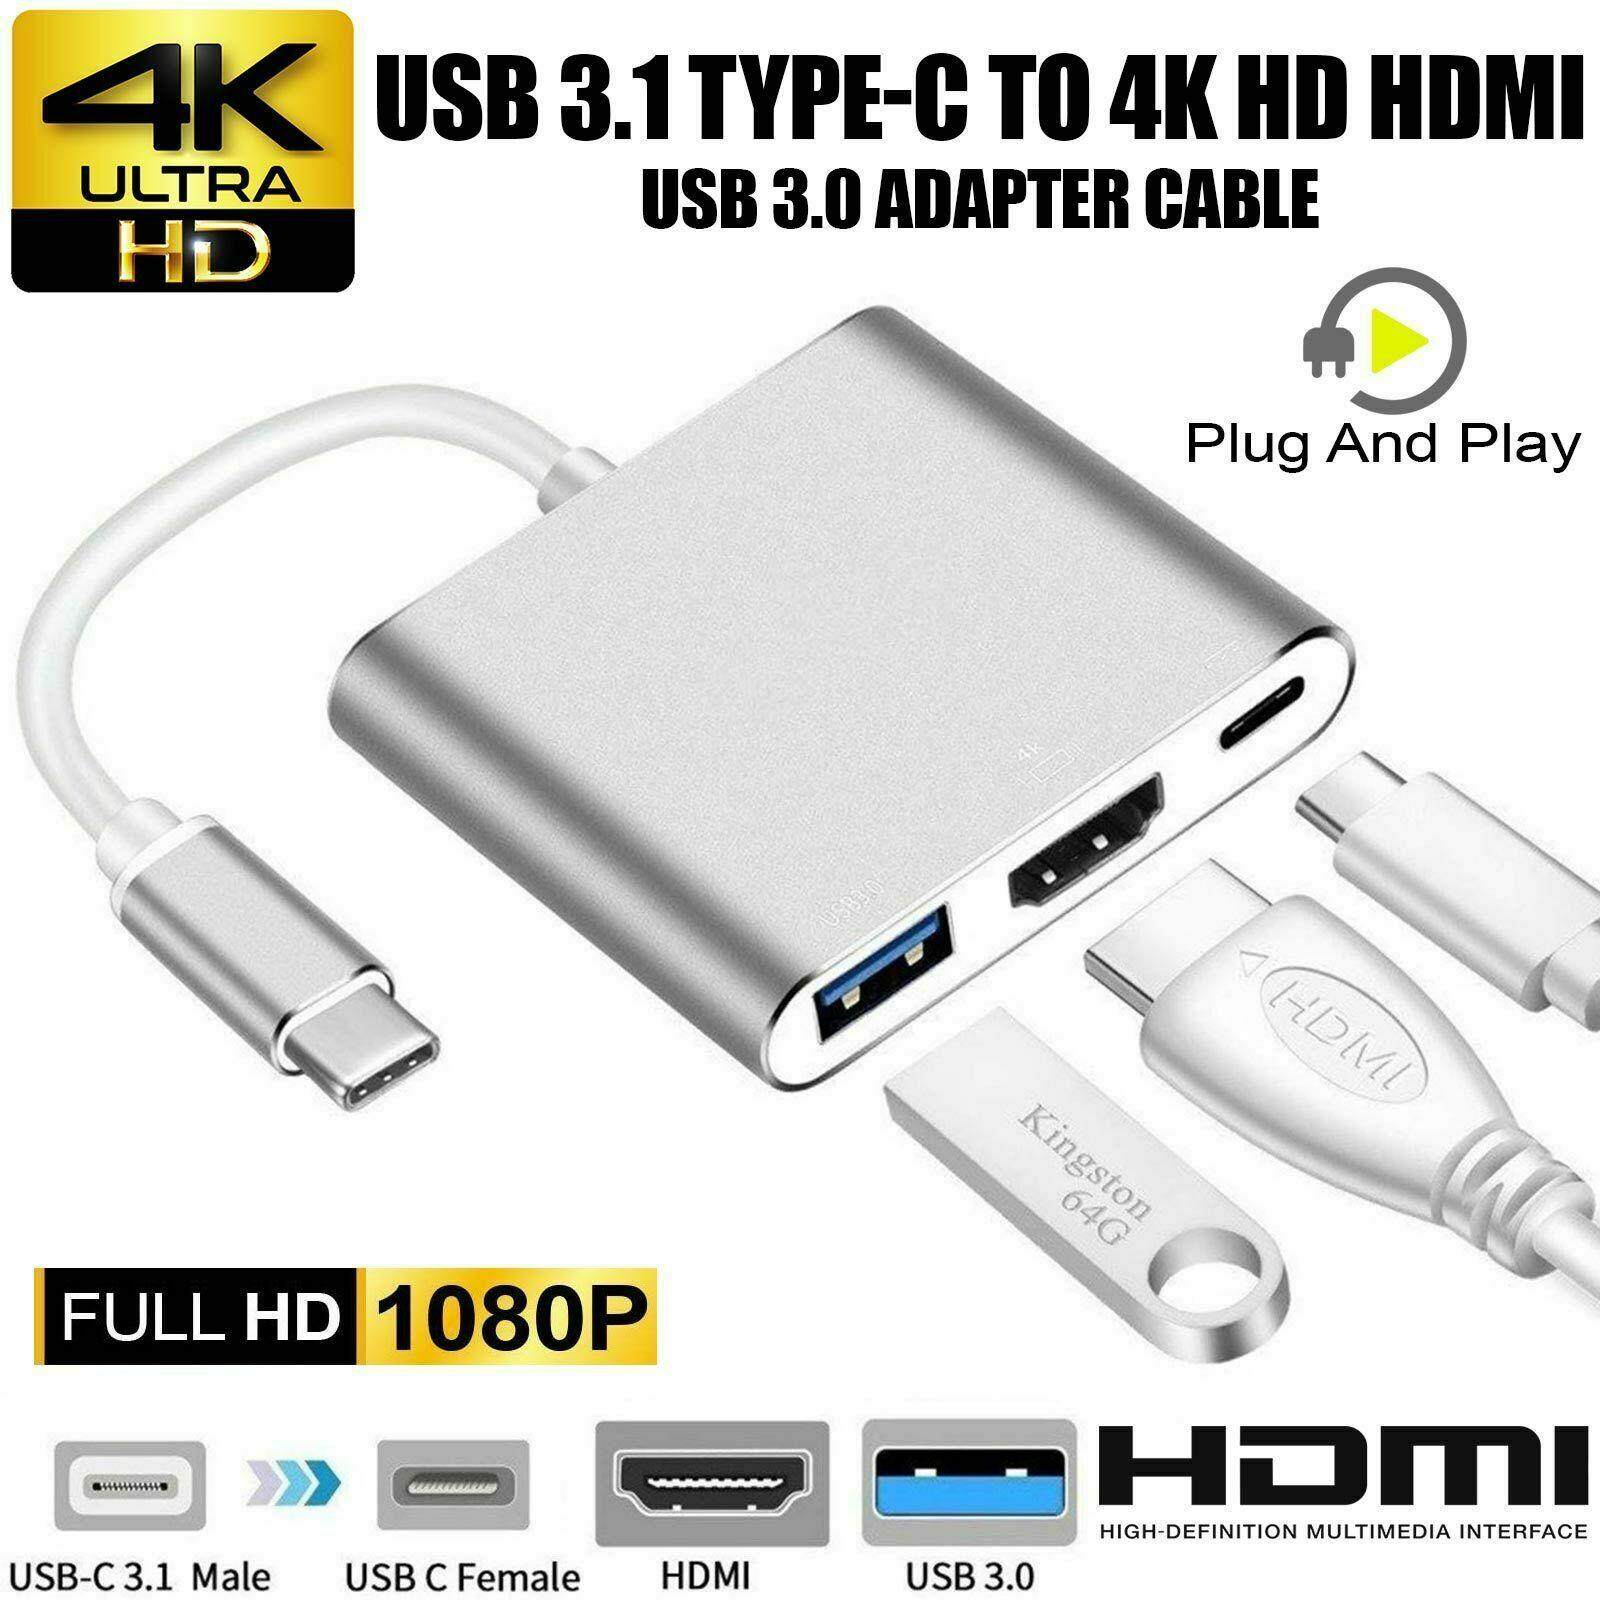 Type C USB 3.1 to HDMI USB3.0 Adapter Charging Port for Macbook Laptop